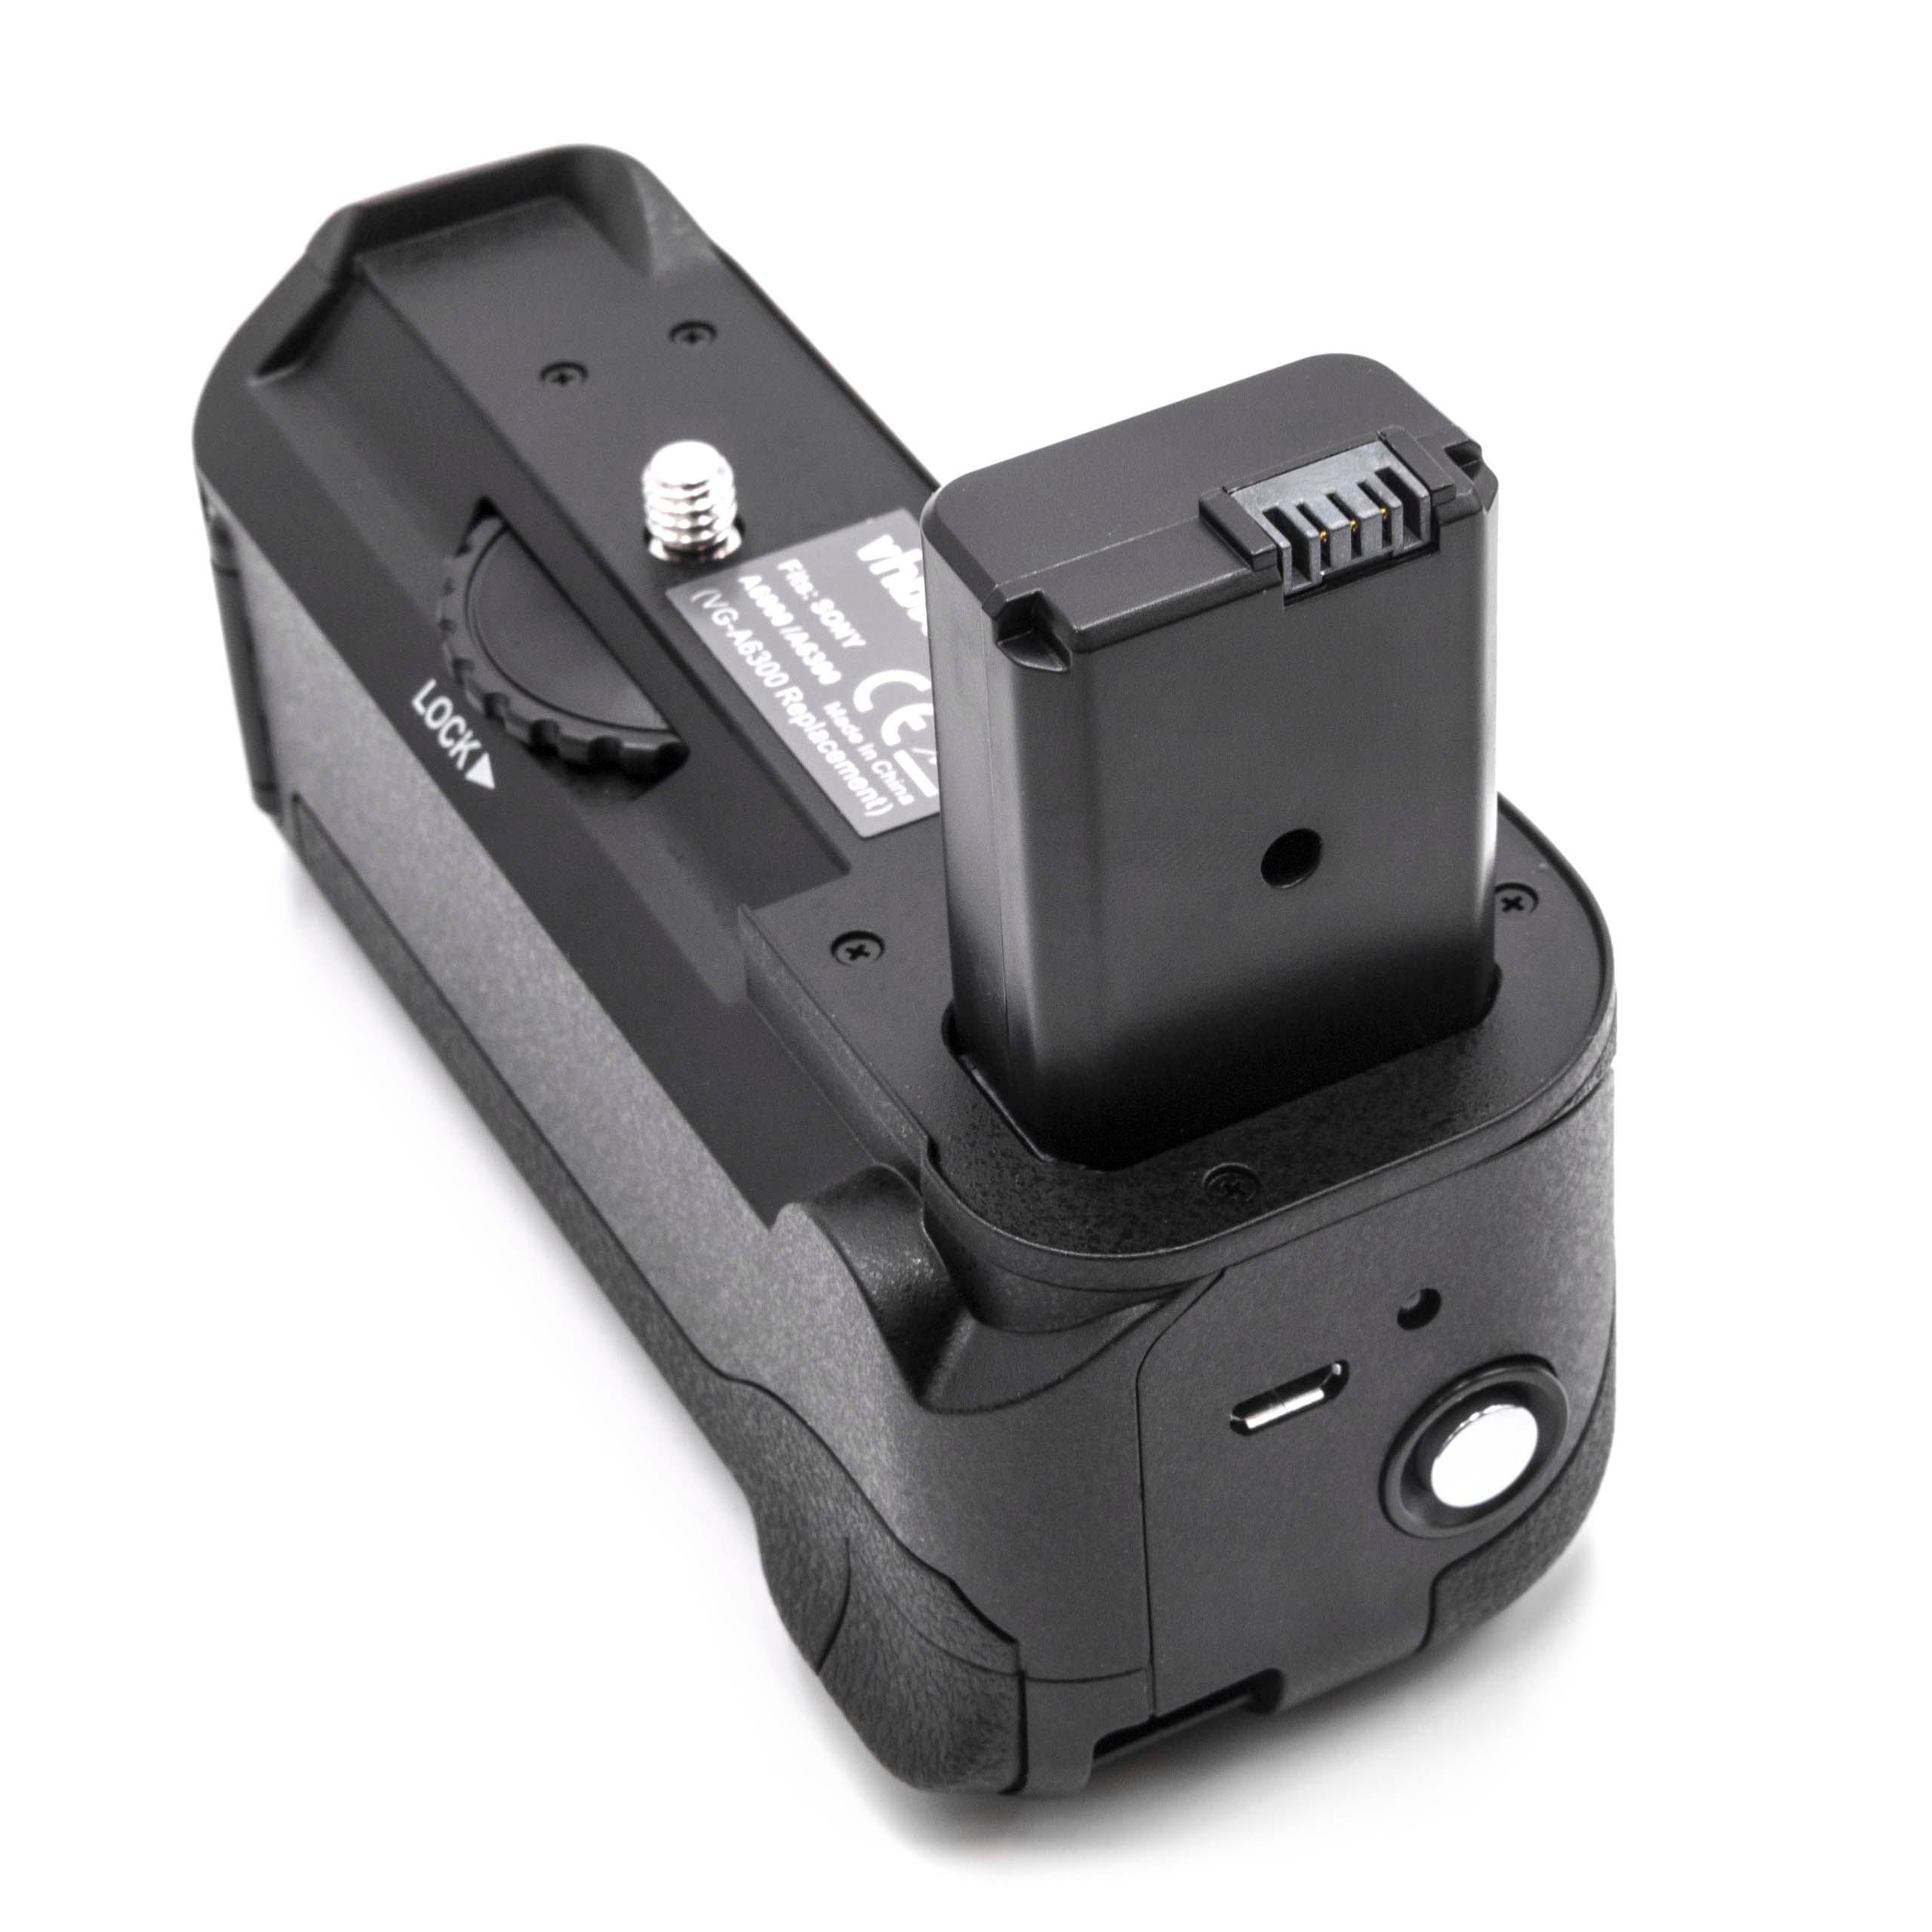 Battery Grip replaces Sony VG-A6300 for Sony Camera - Incl. Mode Dial, Incl. Trigger